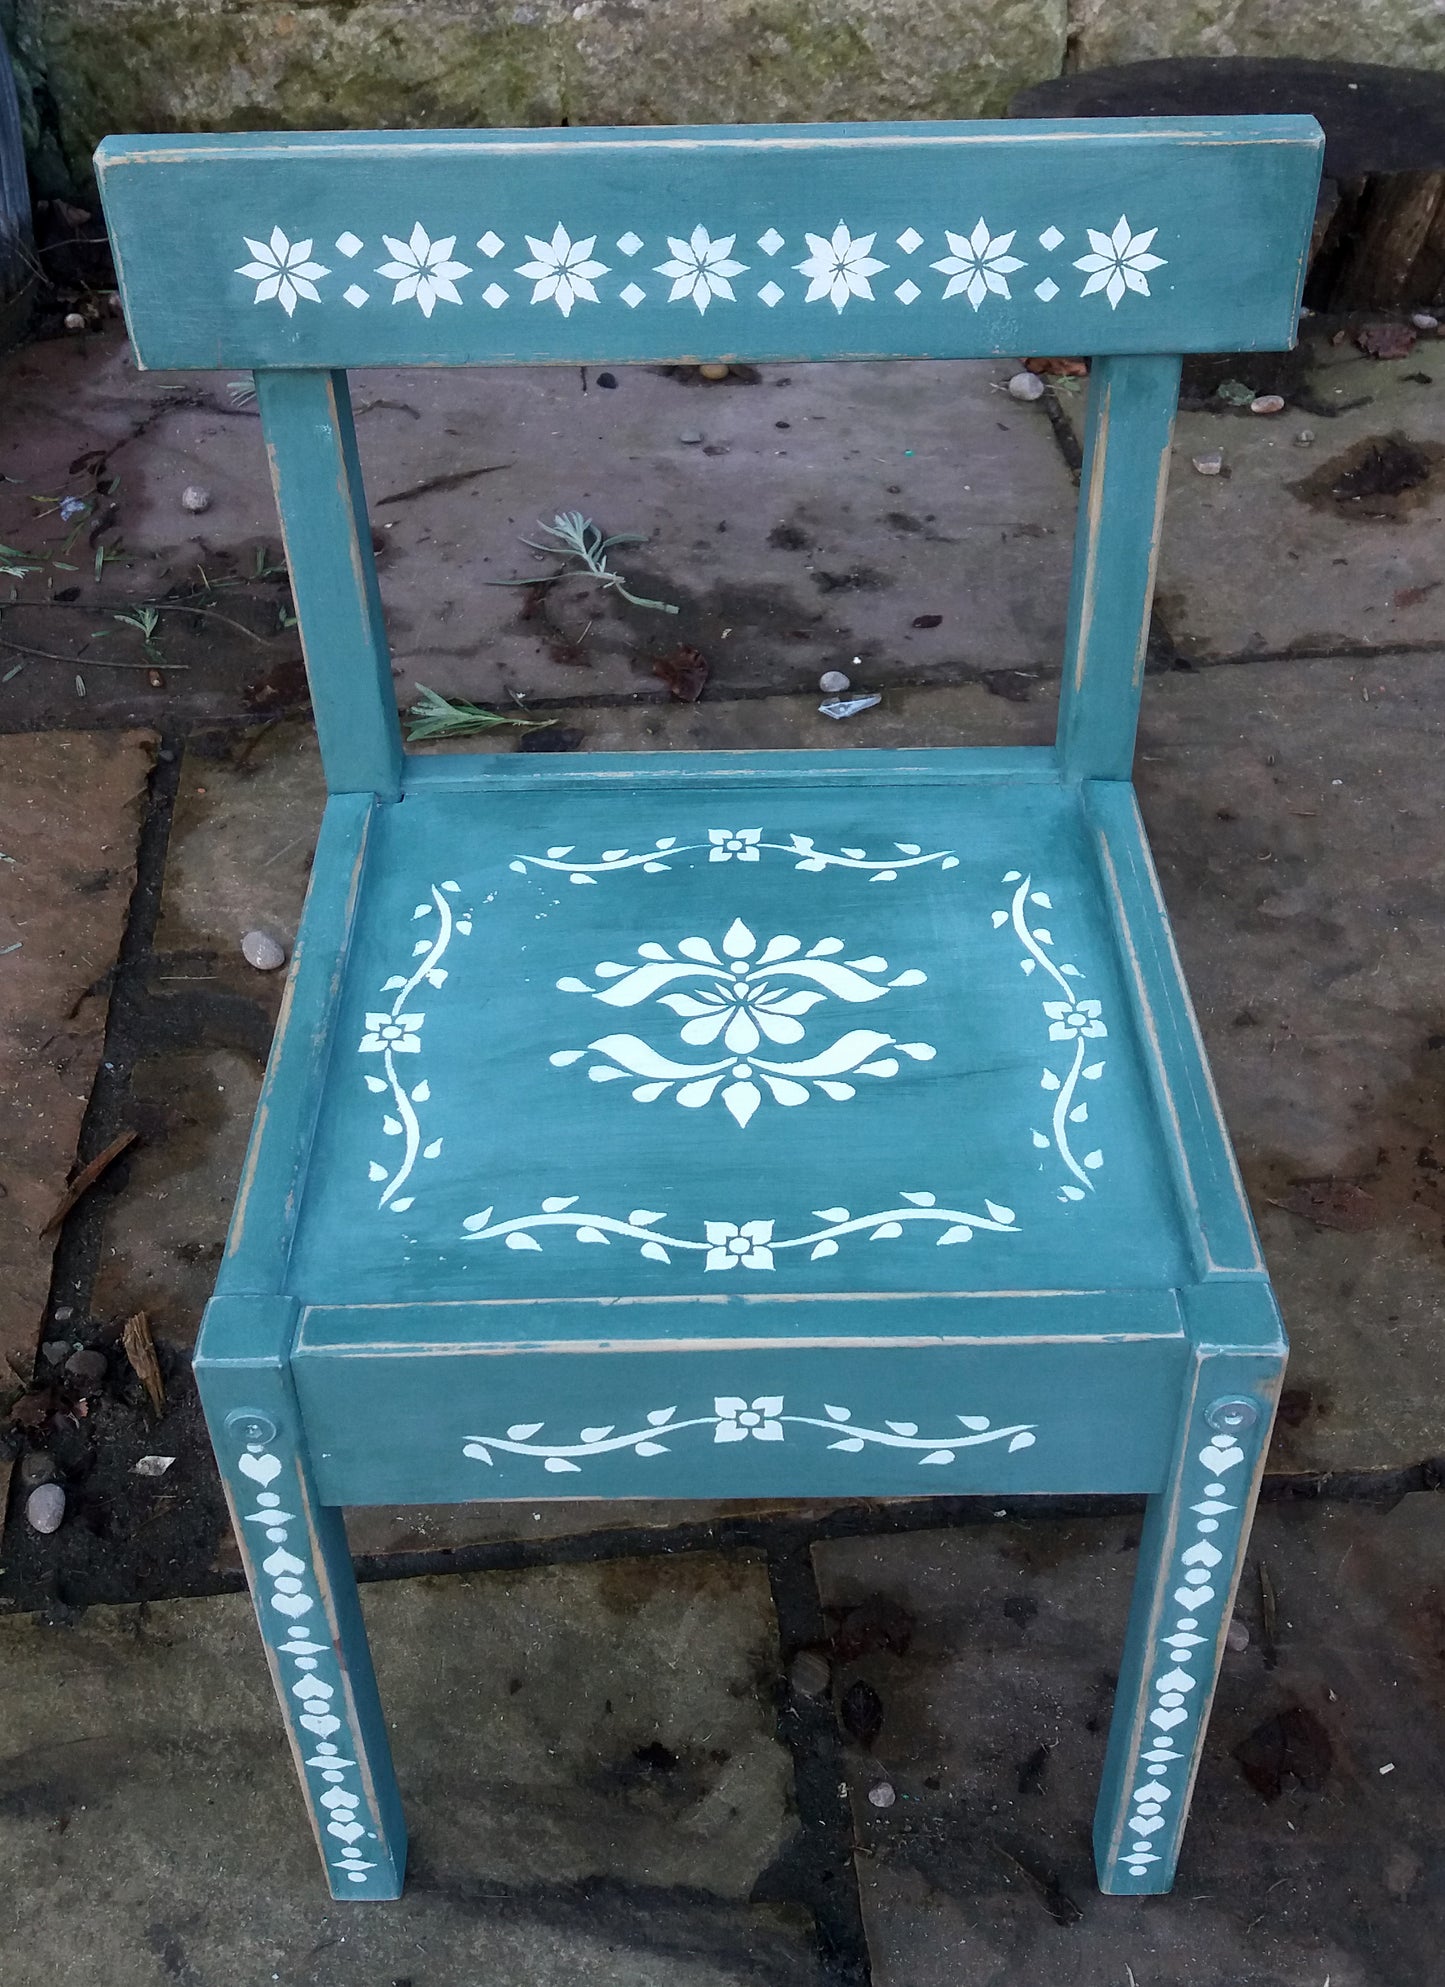 Little Children's chair painted in a deep green with folk art stencil design in white